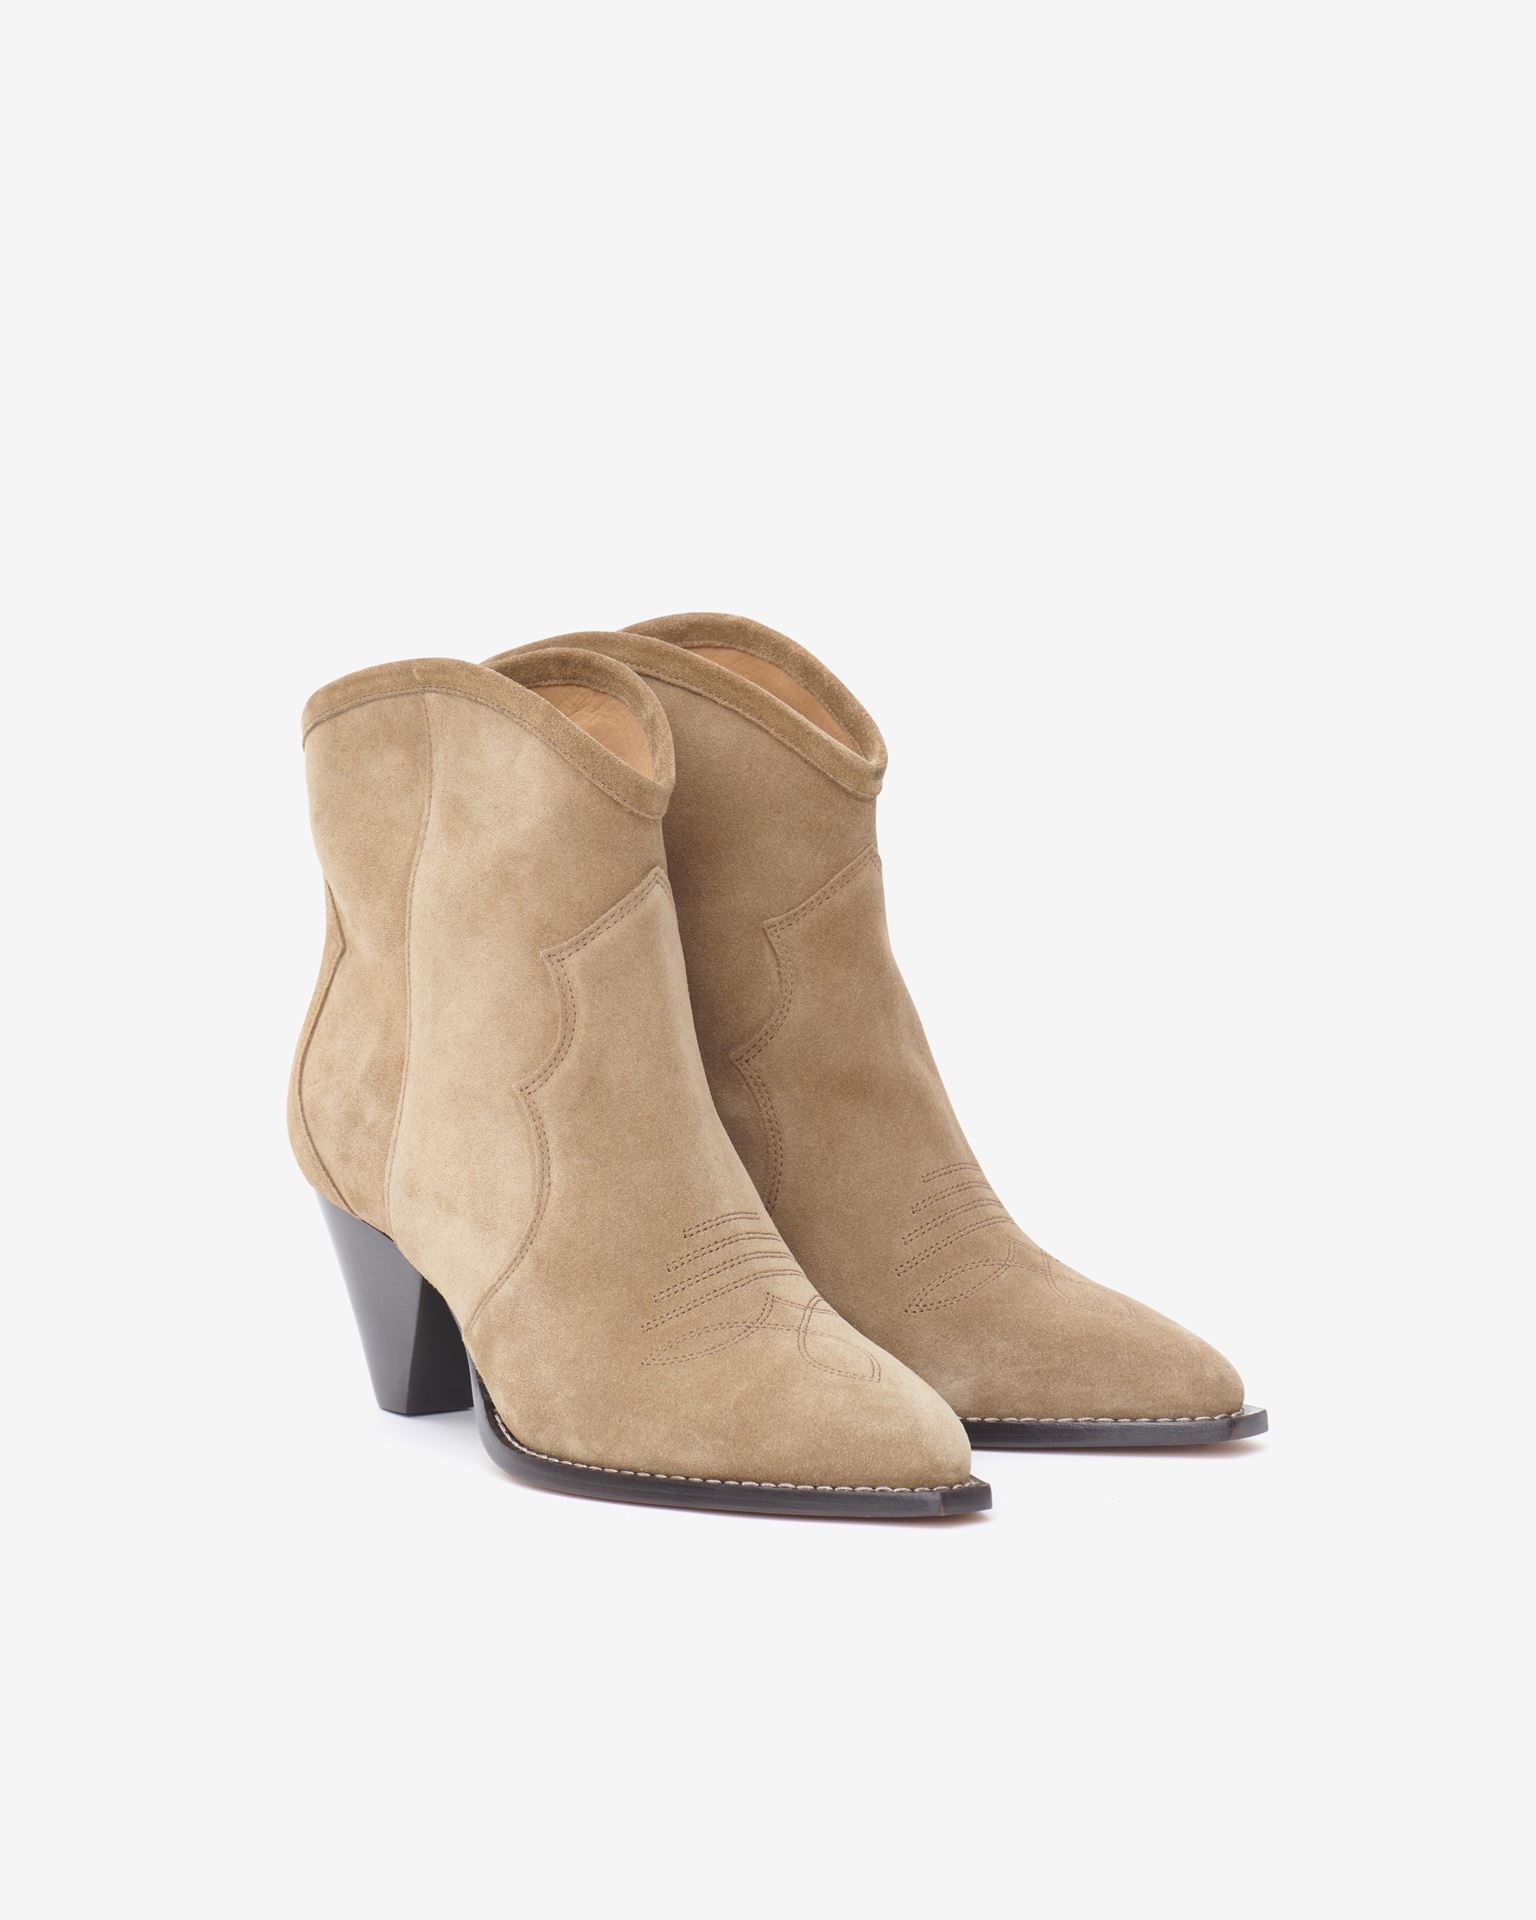 Isabel Marant, Darizo Calf Suede Leather Low Boots - Women - Brown